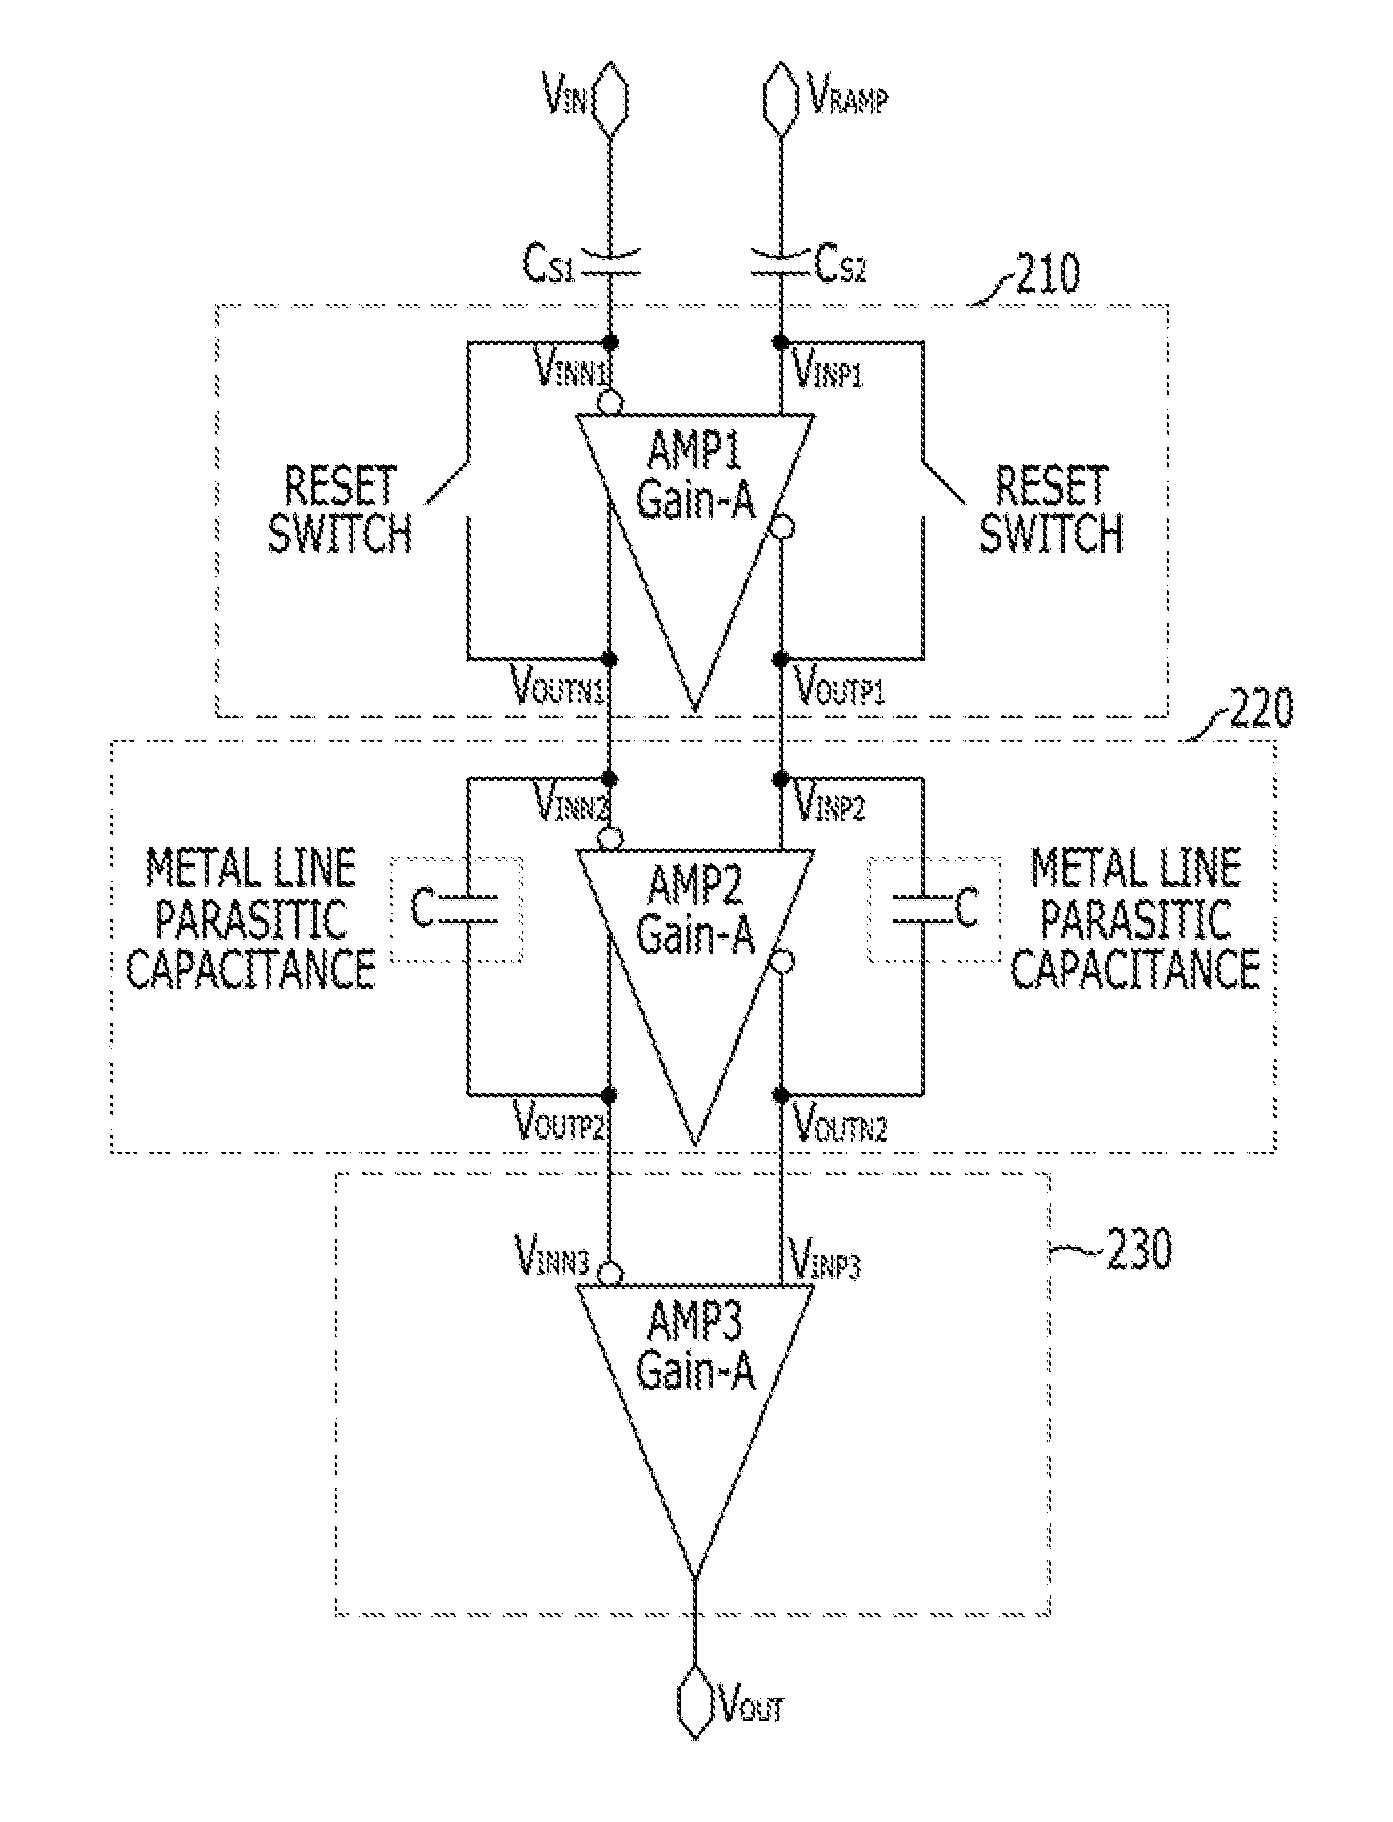 Method for reducing noise using layout scheme and comparing device